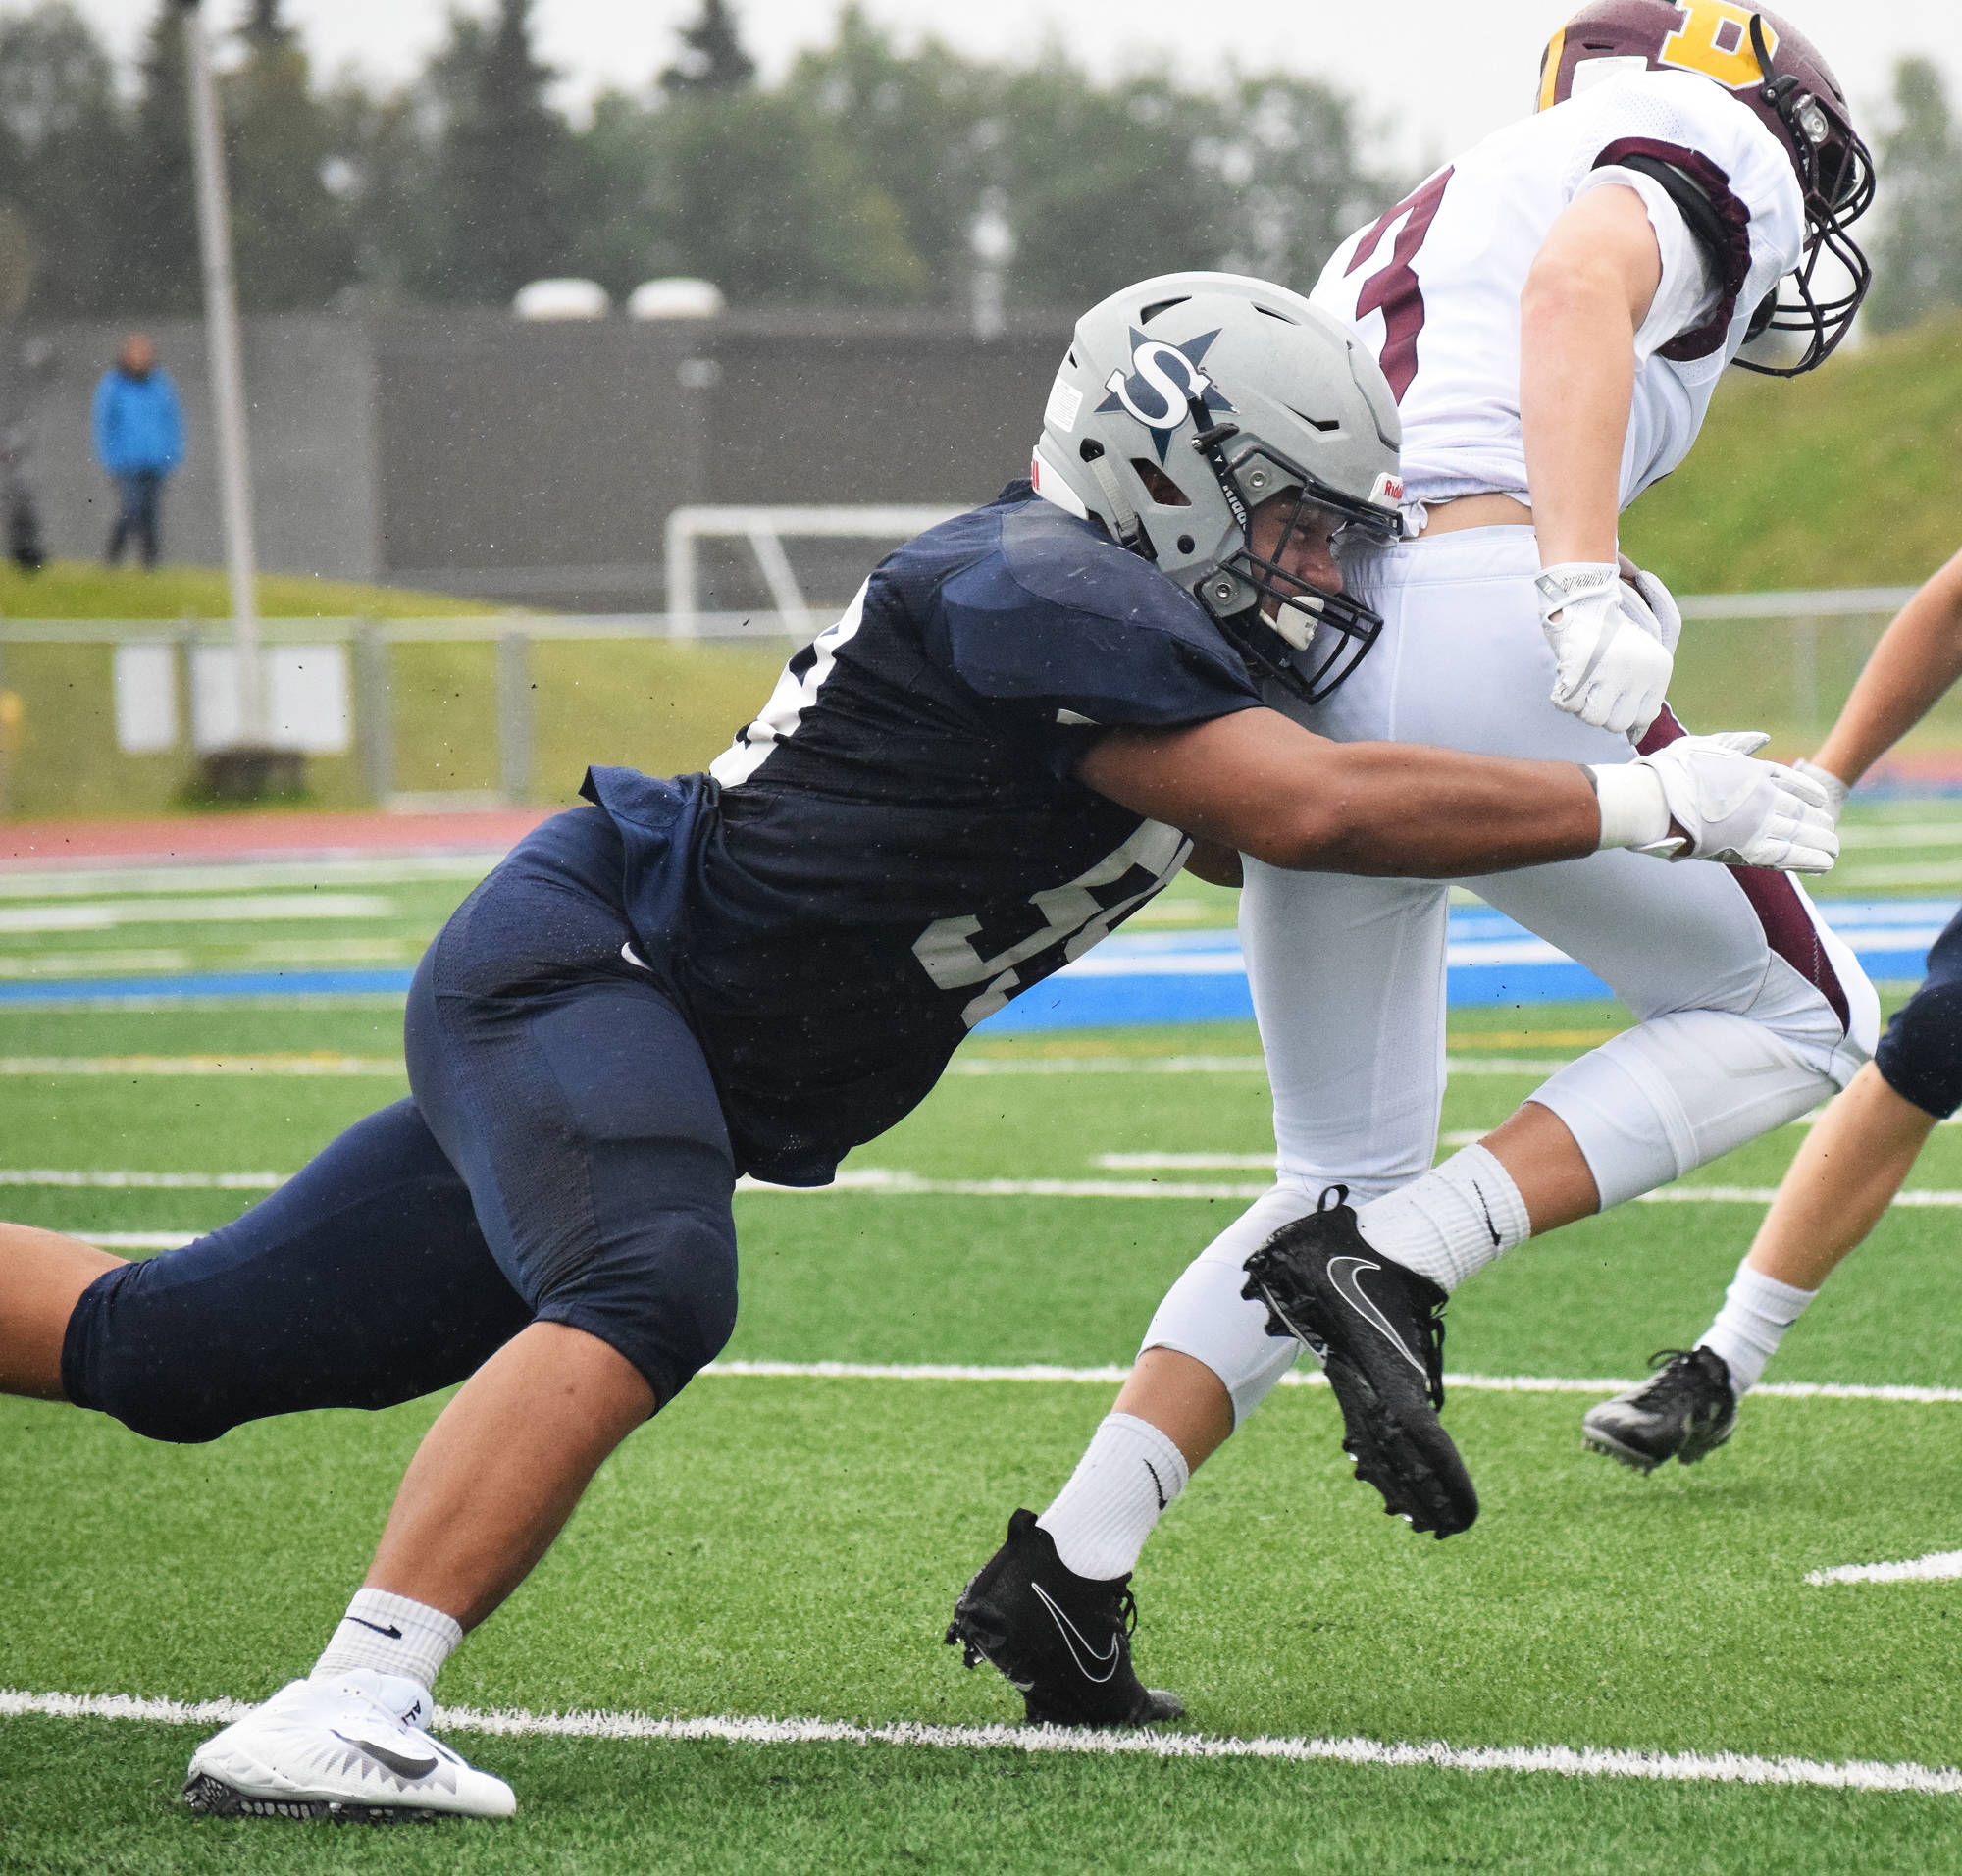 Soldotna lineman Wendell Tuisuala wraps up Dimond running back Ryan Beach Friday night at Justin Maile Field in Soldotna. (Photo by Joey Klecka/Peninsula Clarion)